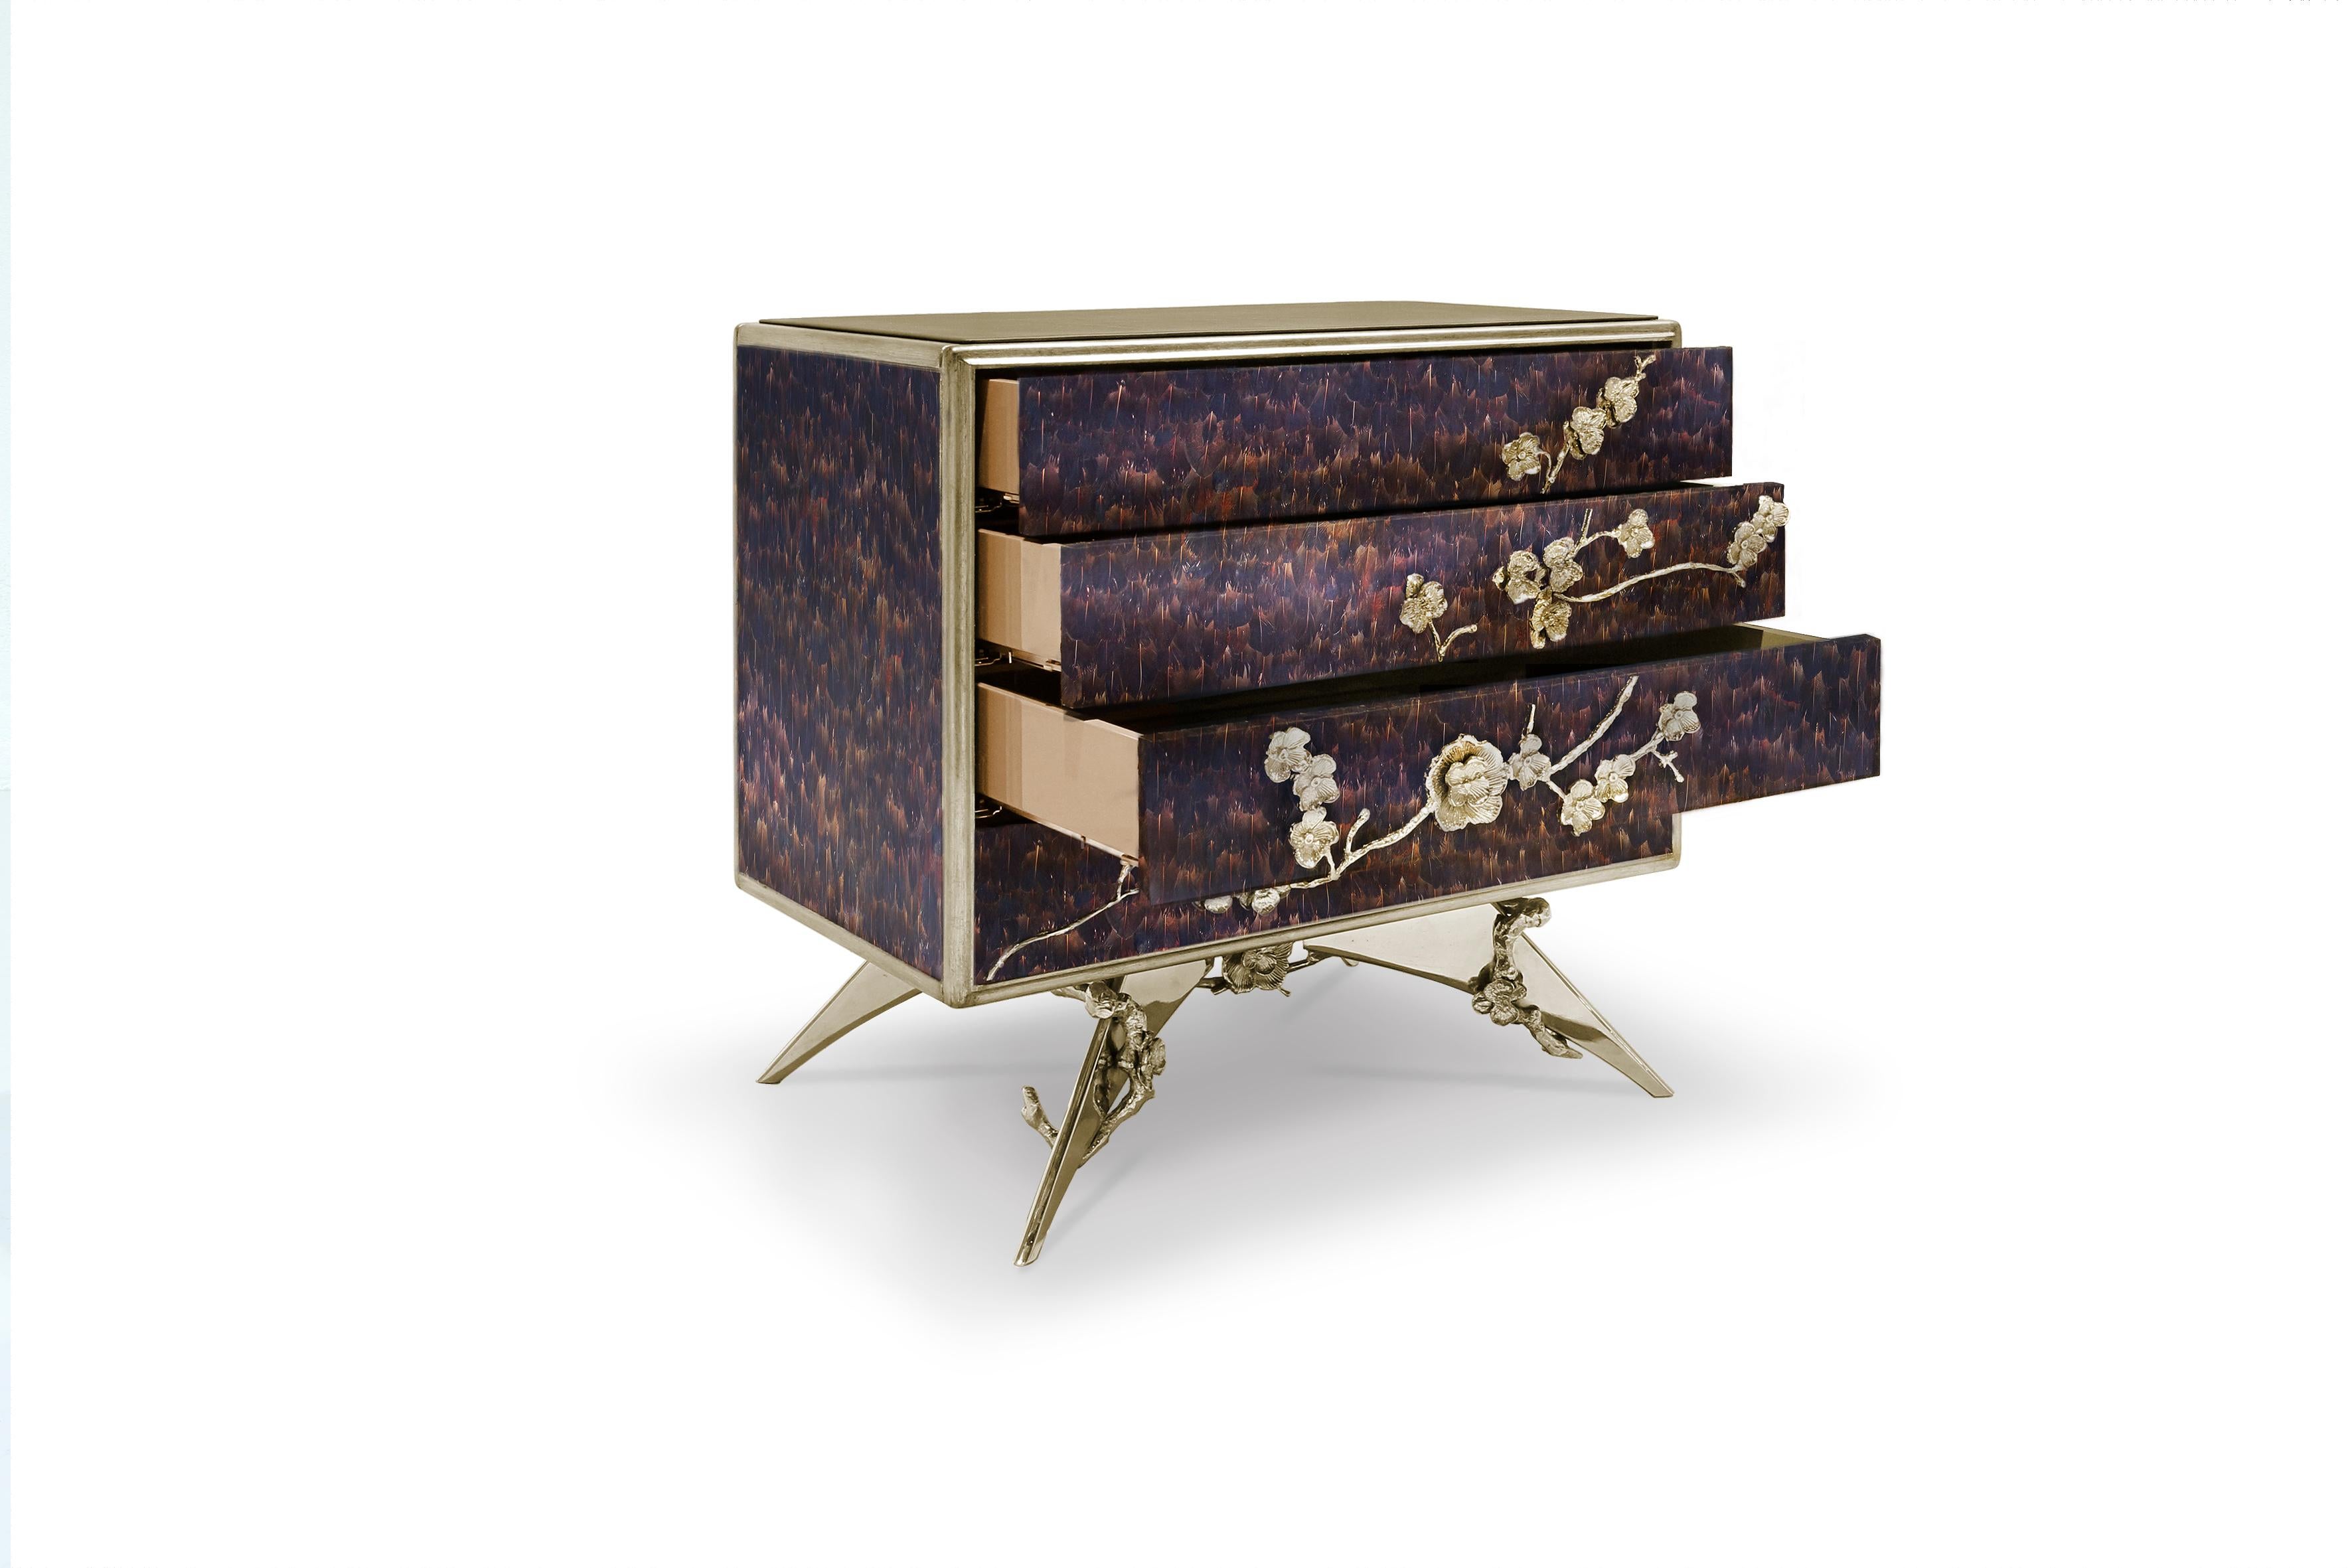 There is a sense of reveal and conceal as Koket takes a beautiful nightstand in high gloss lacquer and adorns it in metal organic lace, revealing a mesmerizing hint of what lies beneath. Four drawers embellished with organic hardware.

Structure: